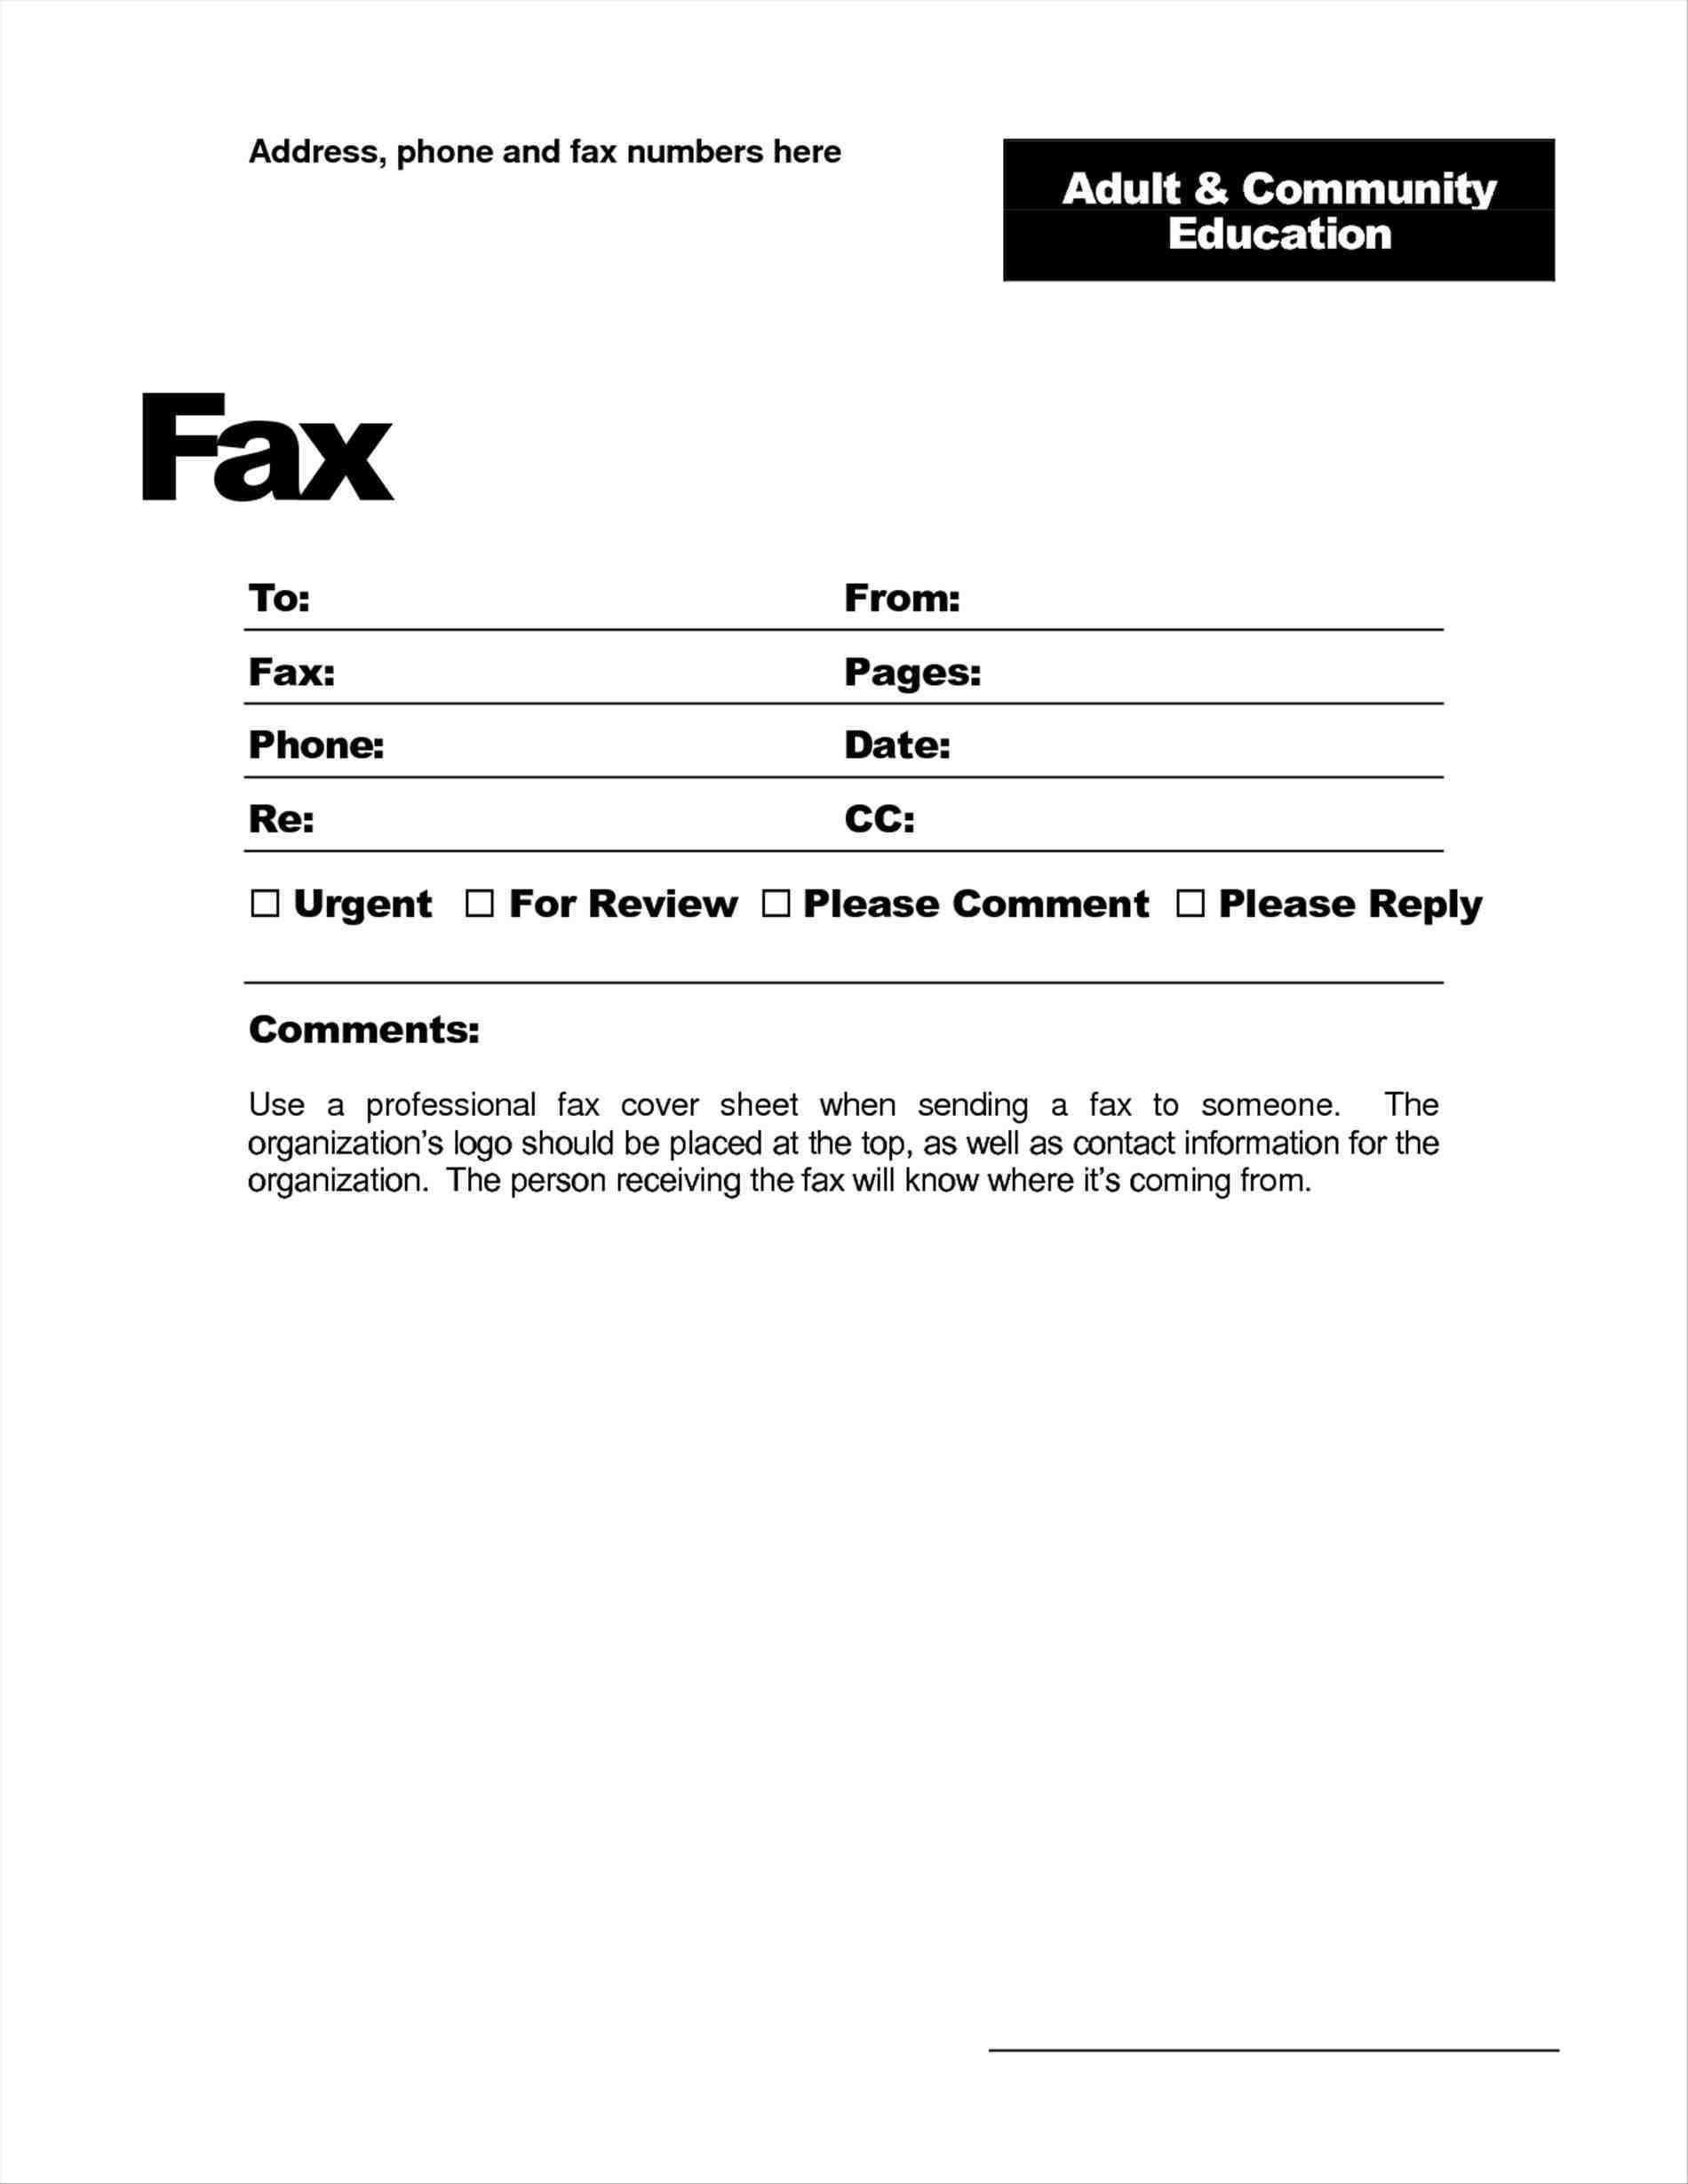 Fax Cover Sheet Template Word 2010